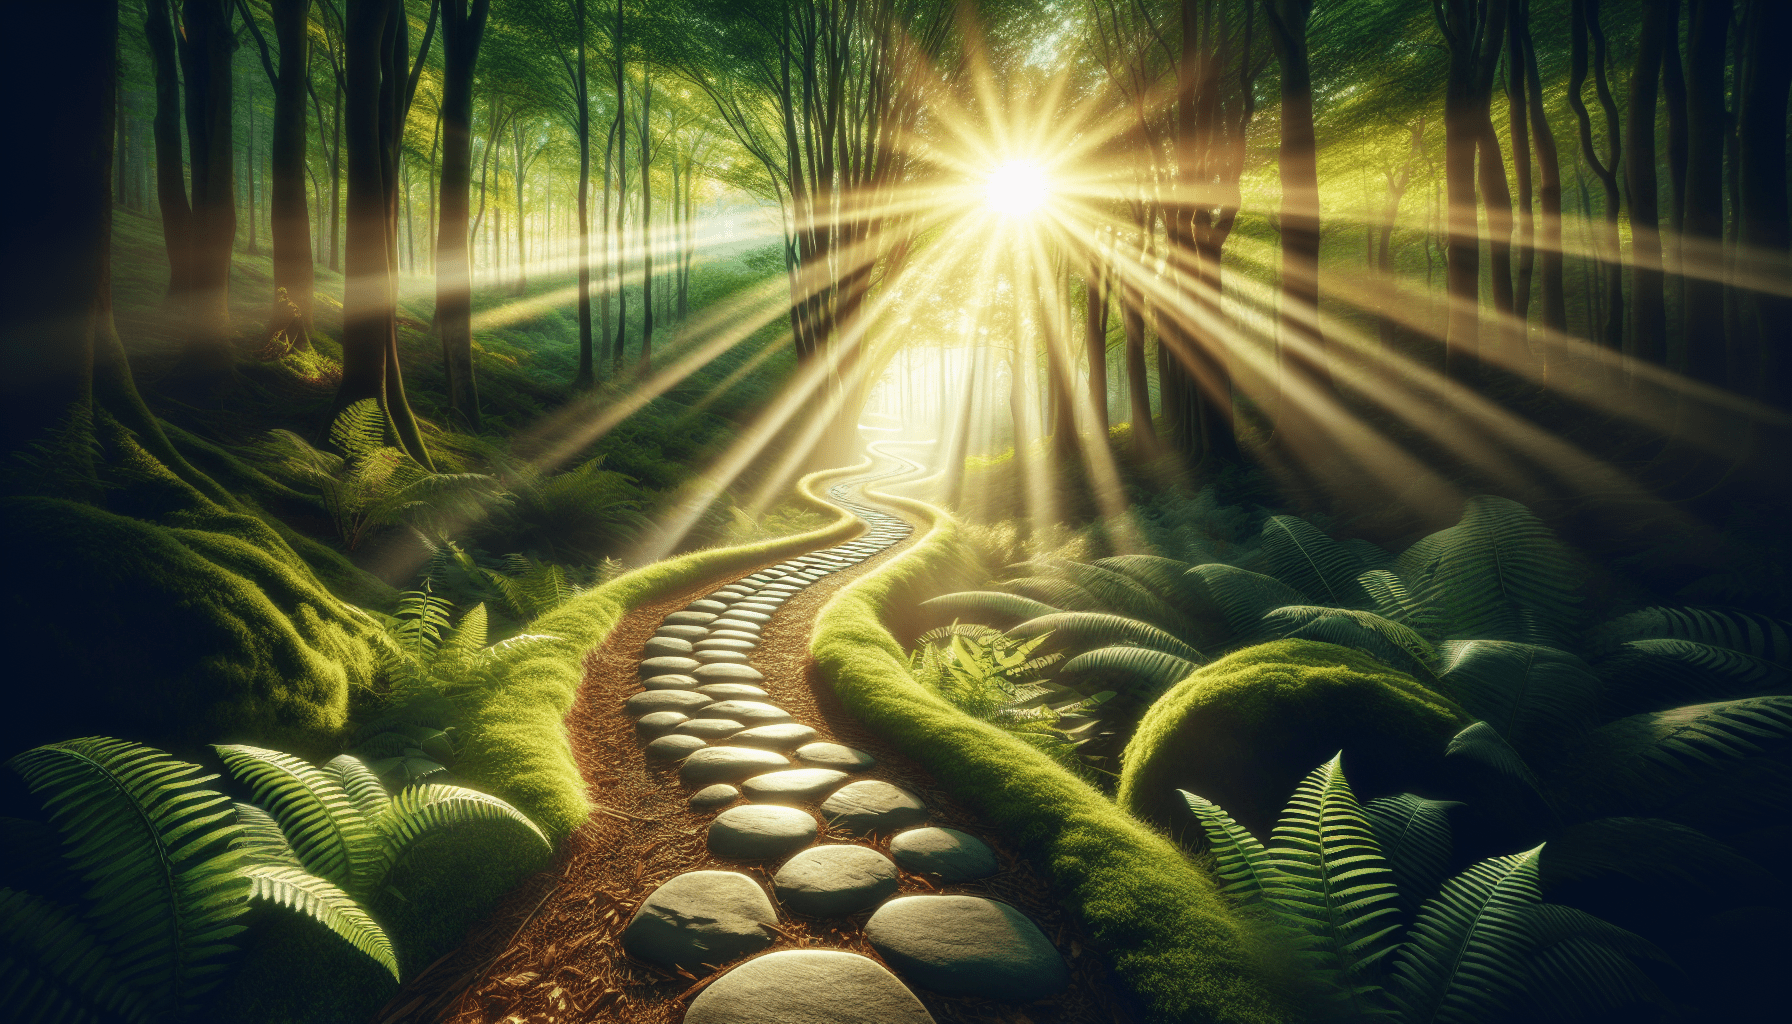 Sunrays streaming through a lush forest onto a winding stone path surrounded by vibrant green ferns and moss-covered terrain.